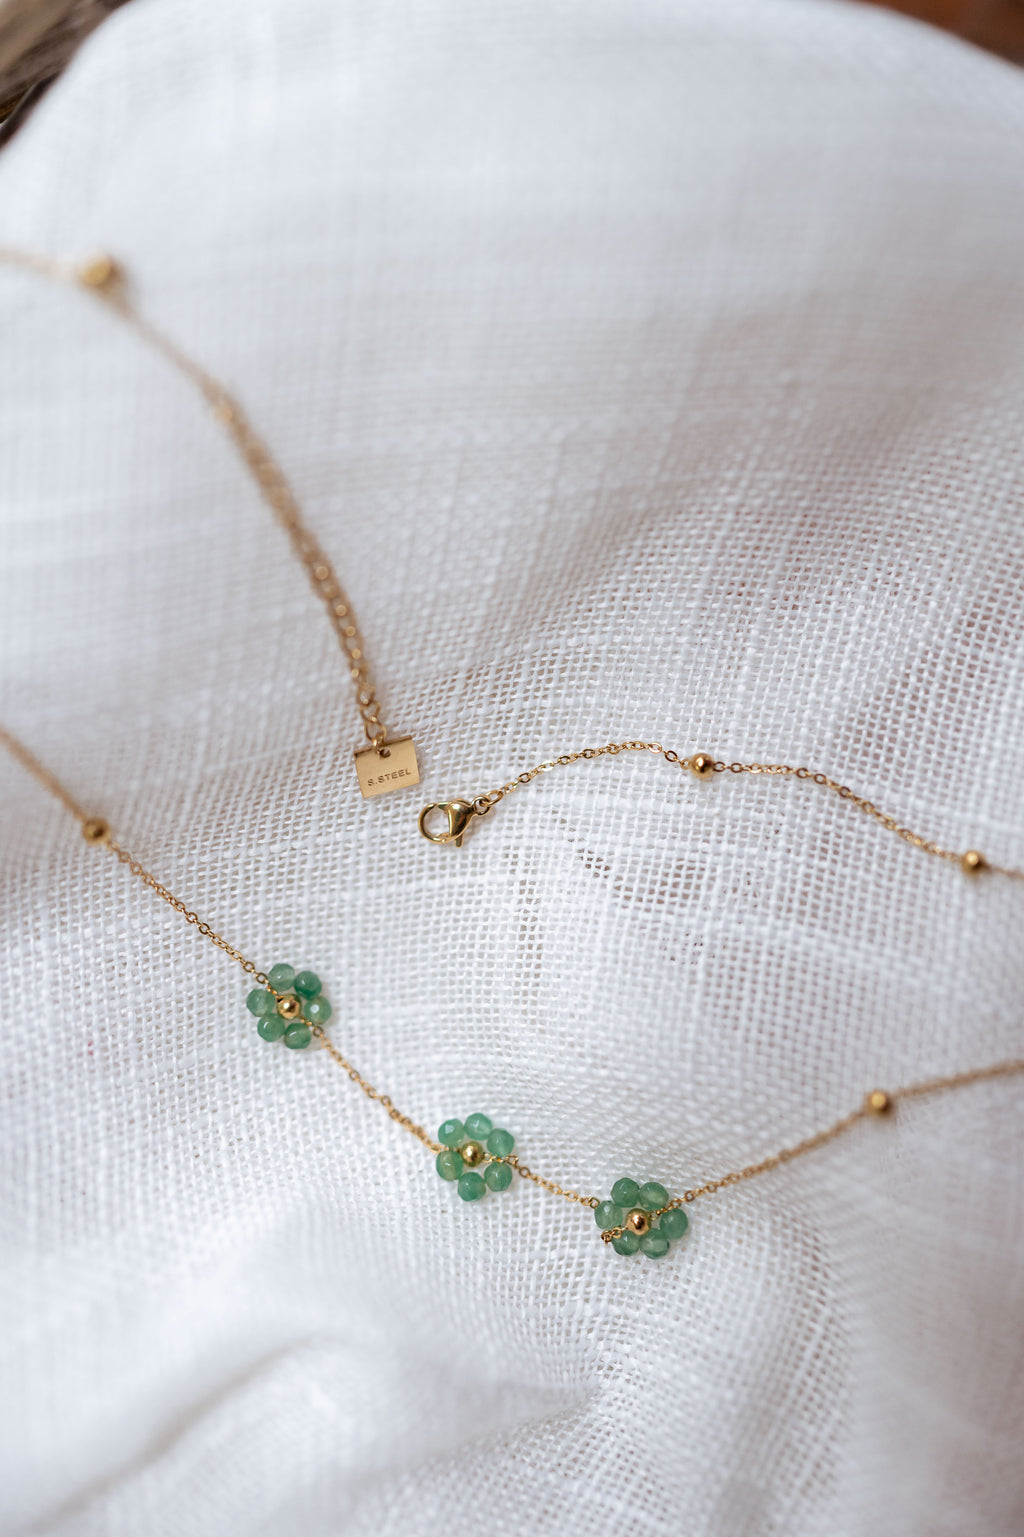 Flowi necklace - green and Golden